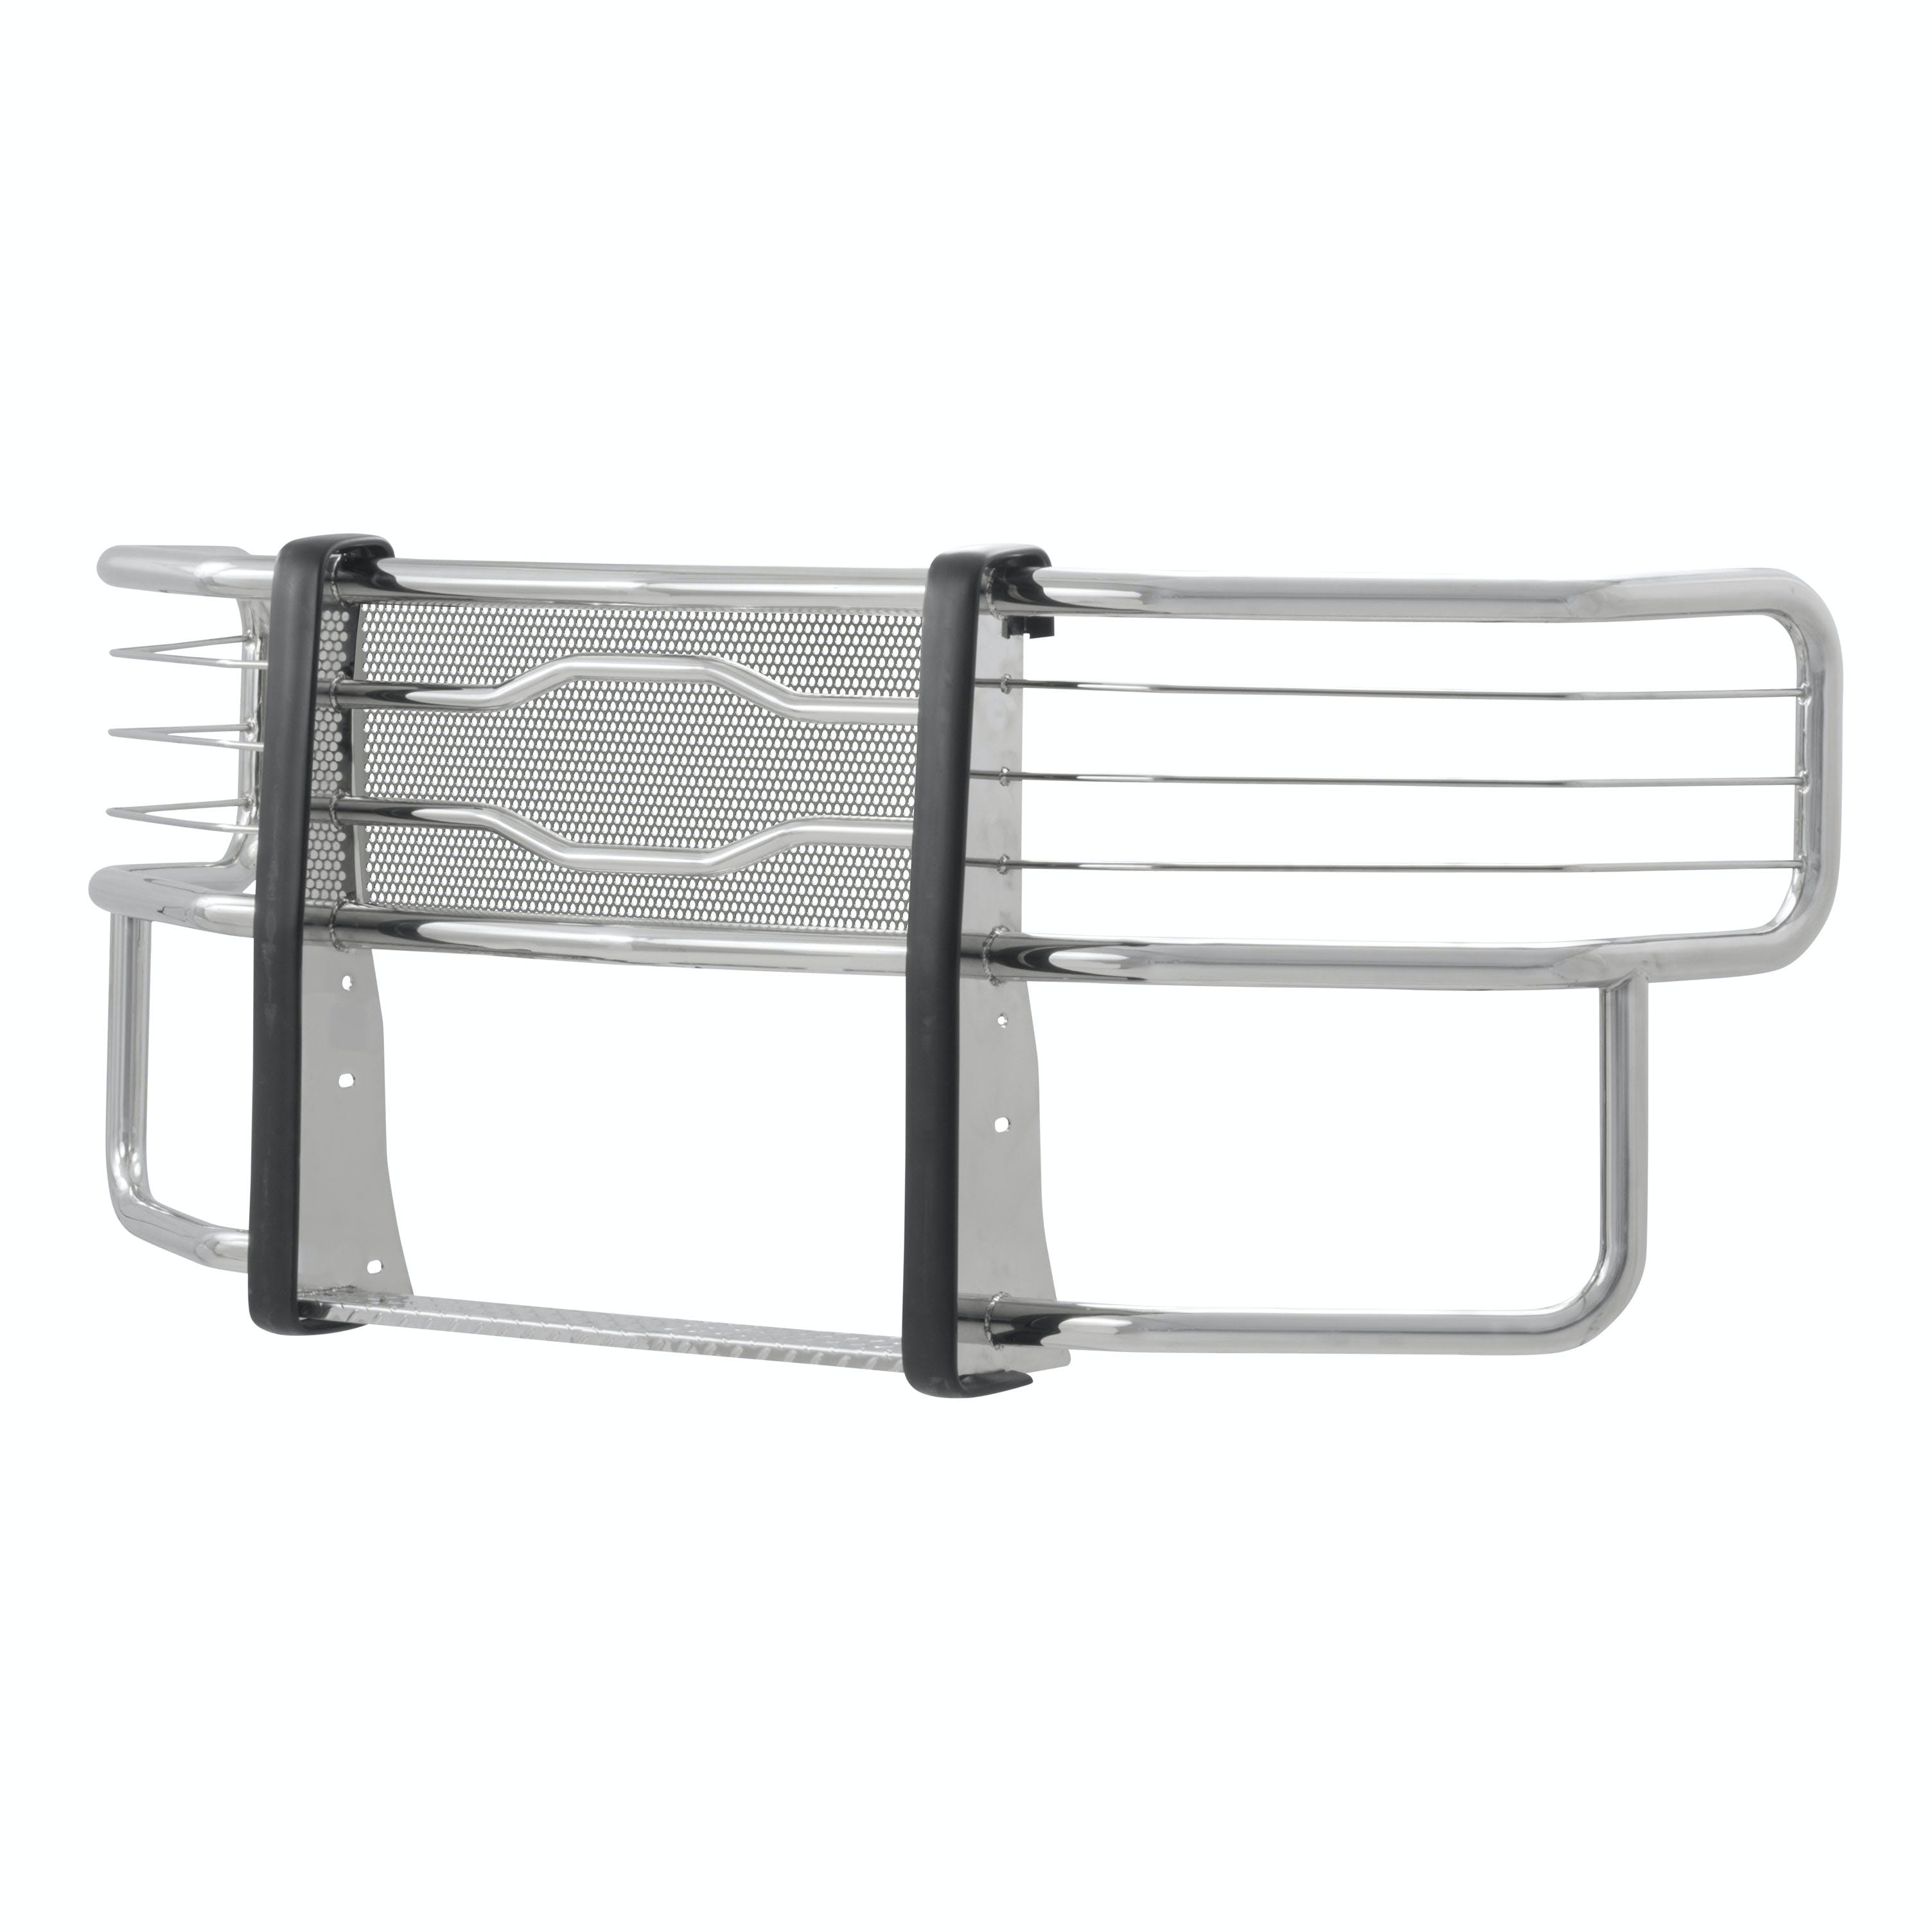 LUVERNE 310713 Prowler Max Grille Guard